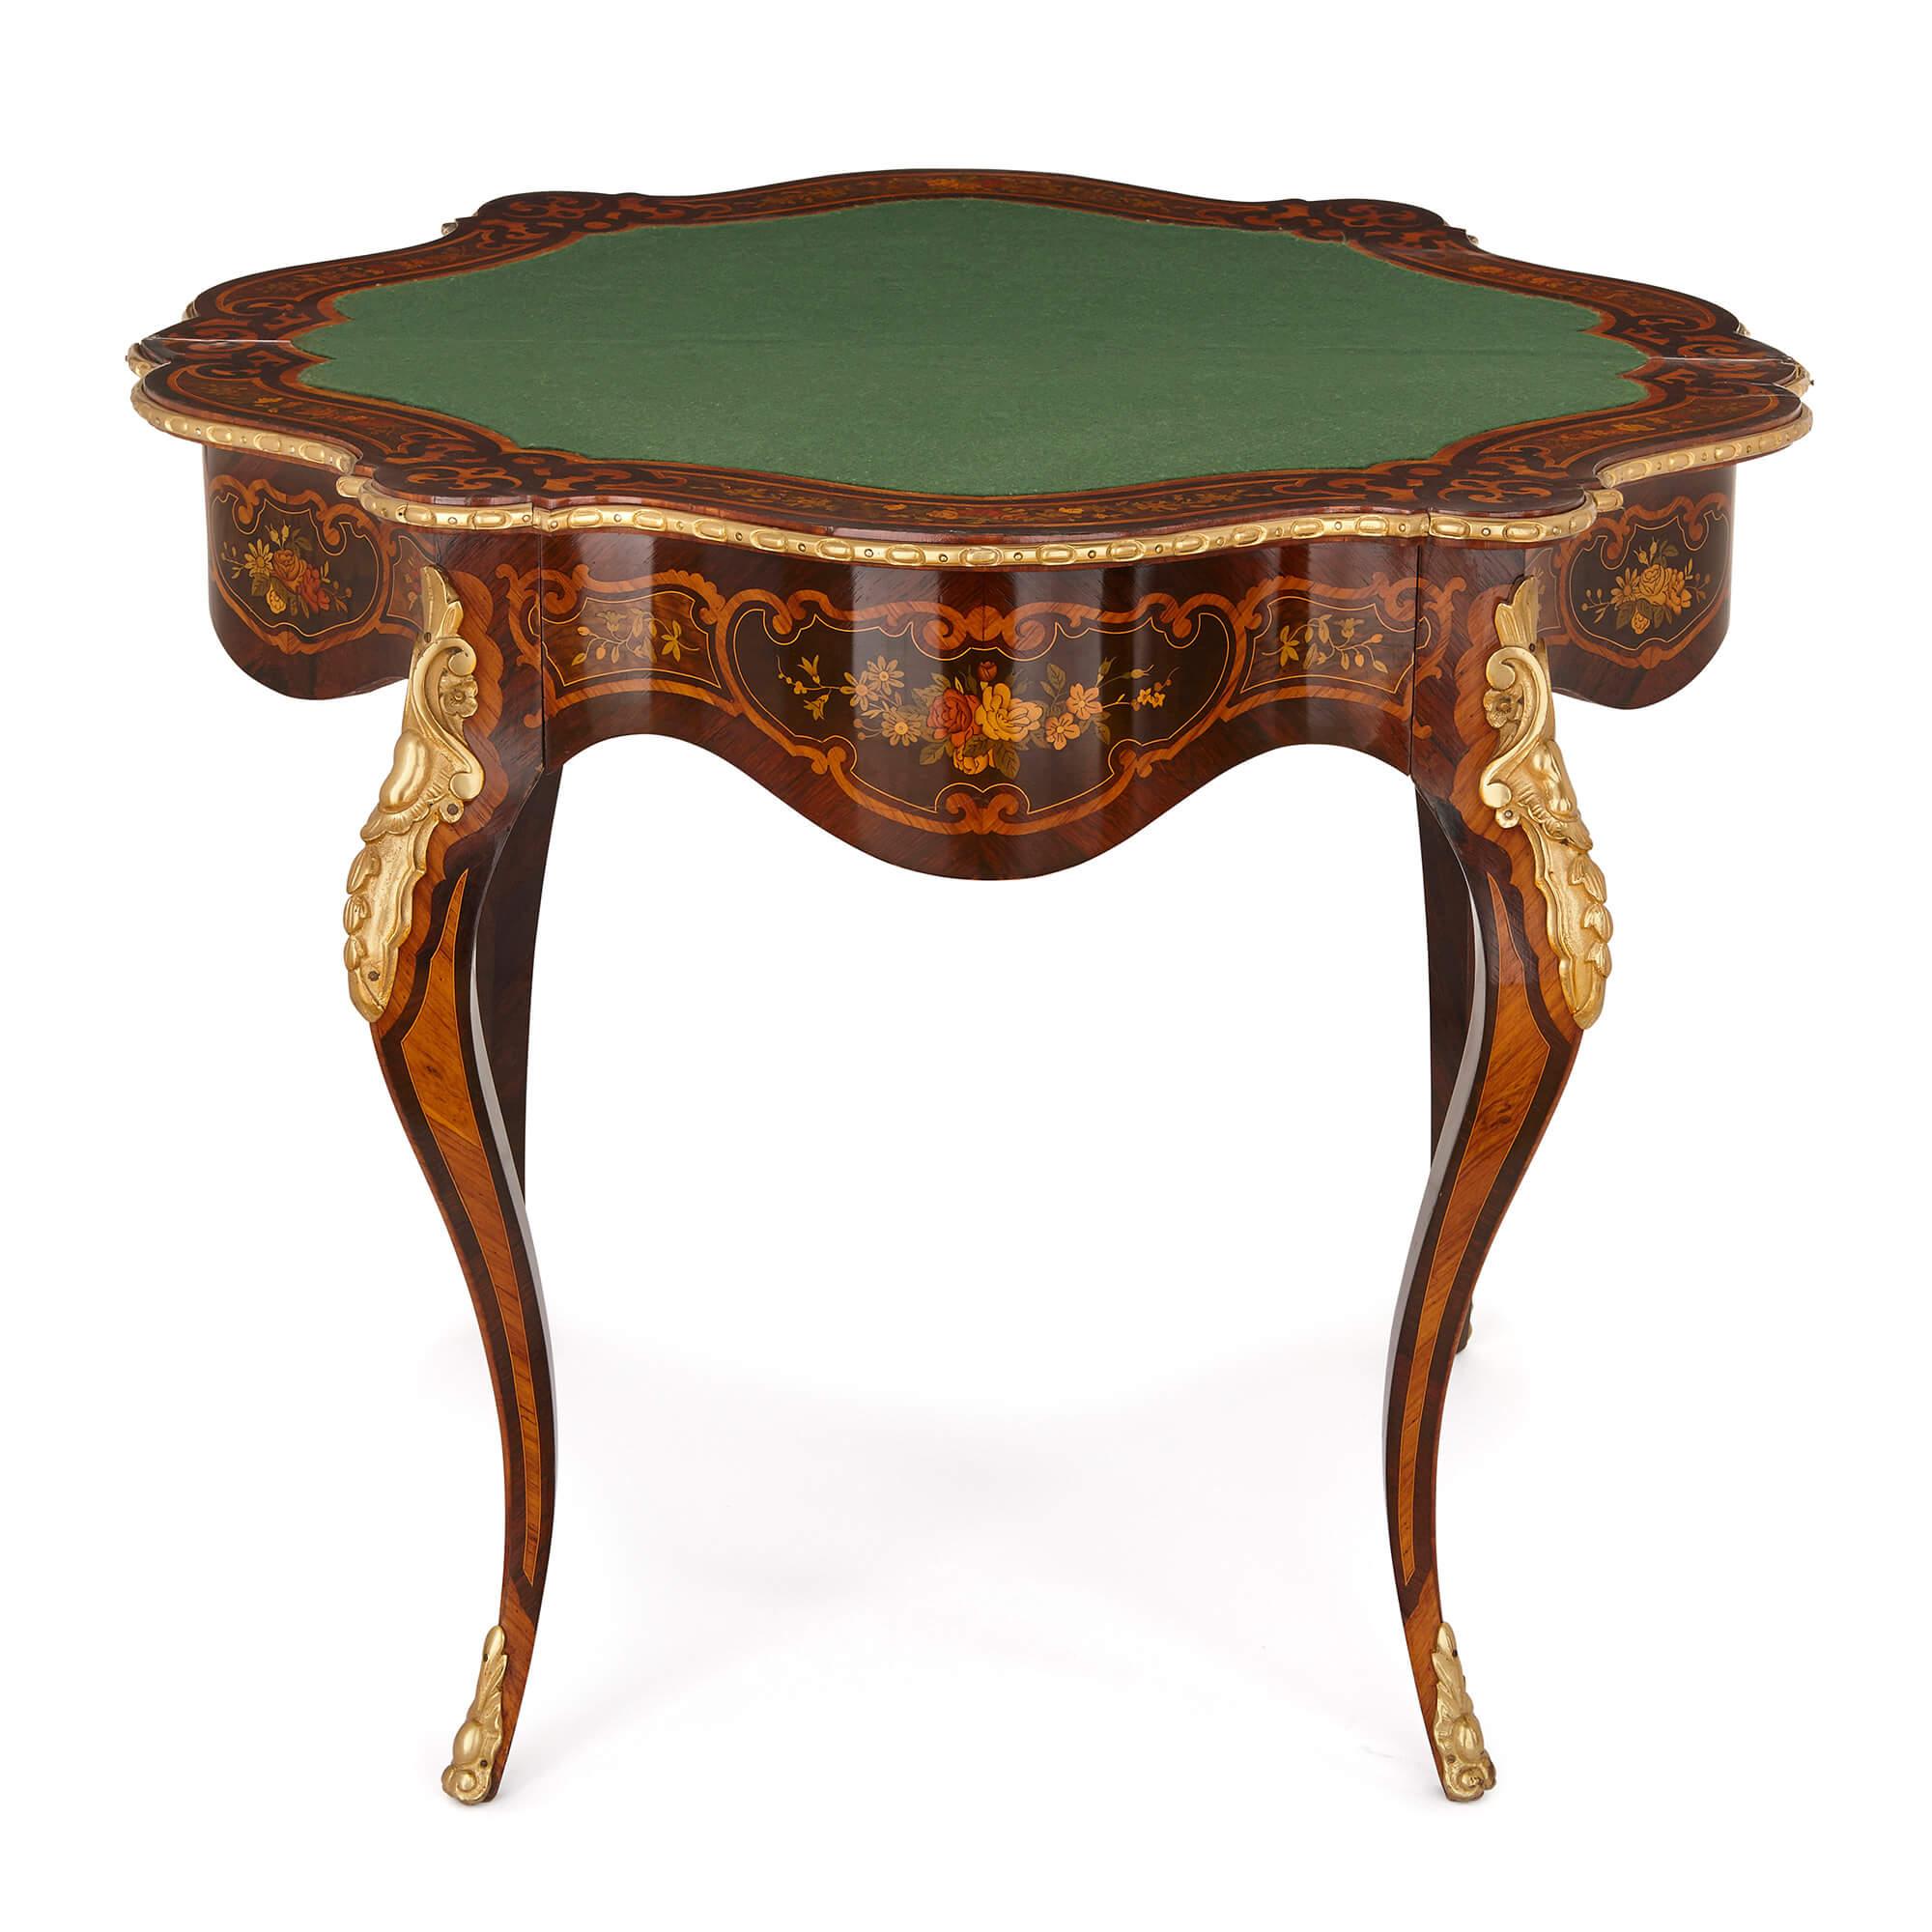 This fine antique table is crafted in the Louis XV style, which is synonymous with grace, elegance and exuberance of design. Made from luxurious materials and exhibiting fine marquetry detailing, the table would enhance and compliment both the